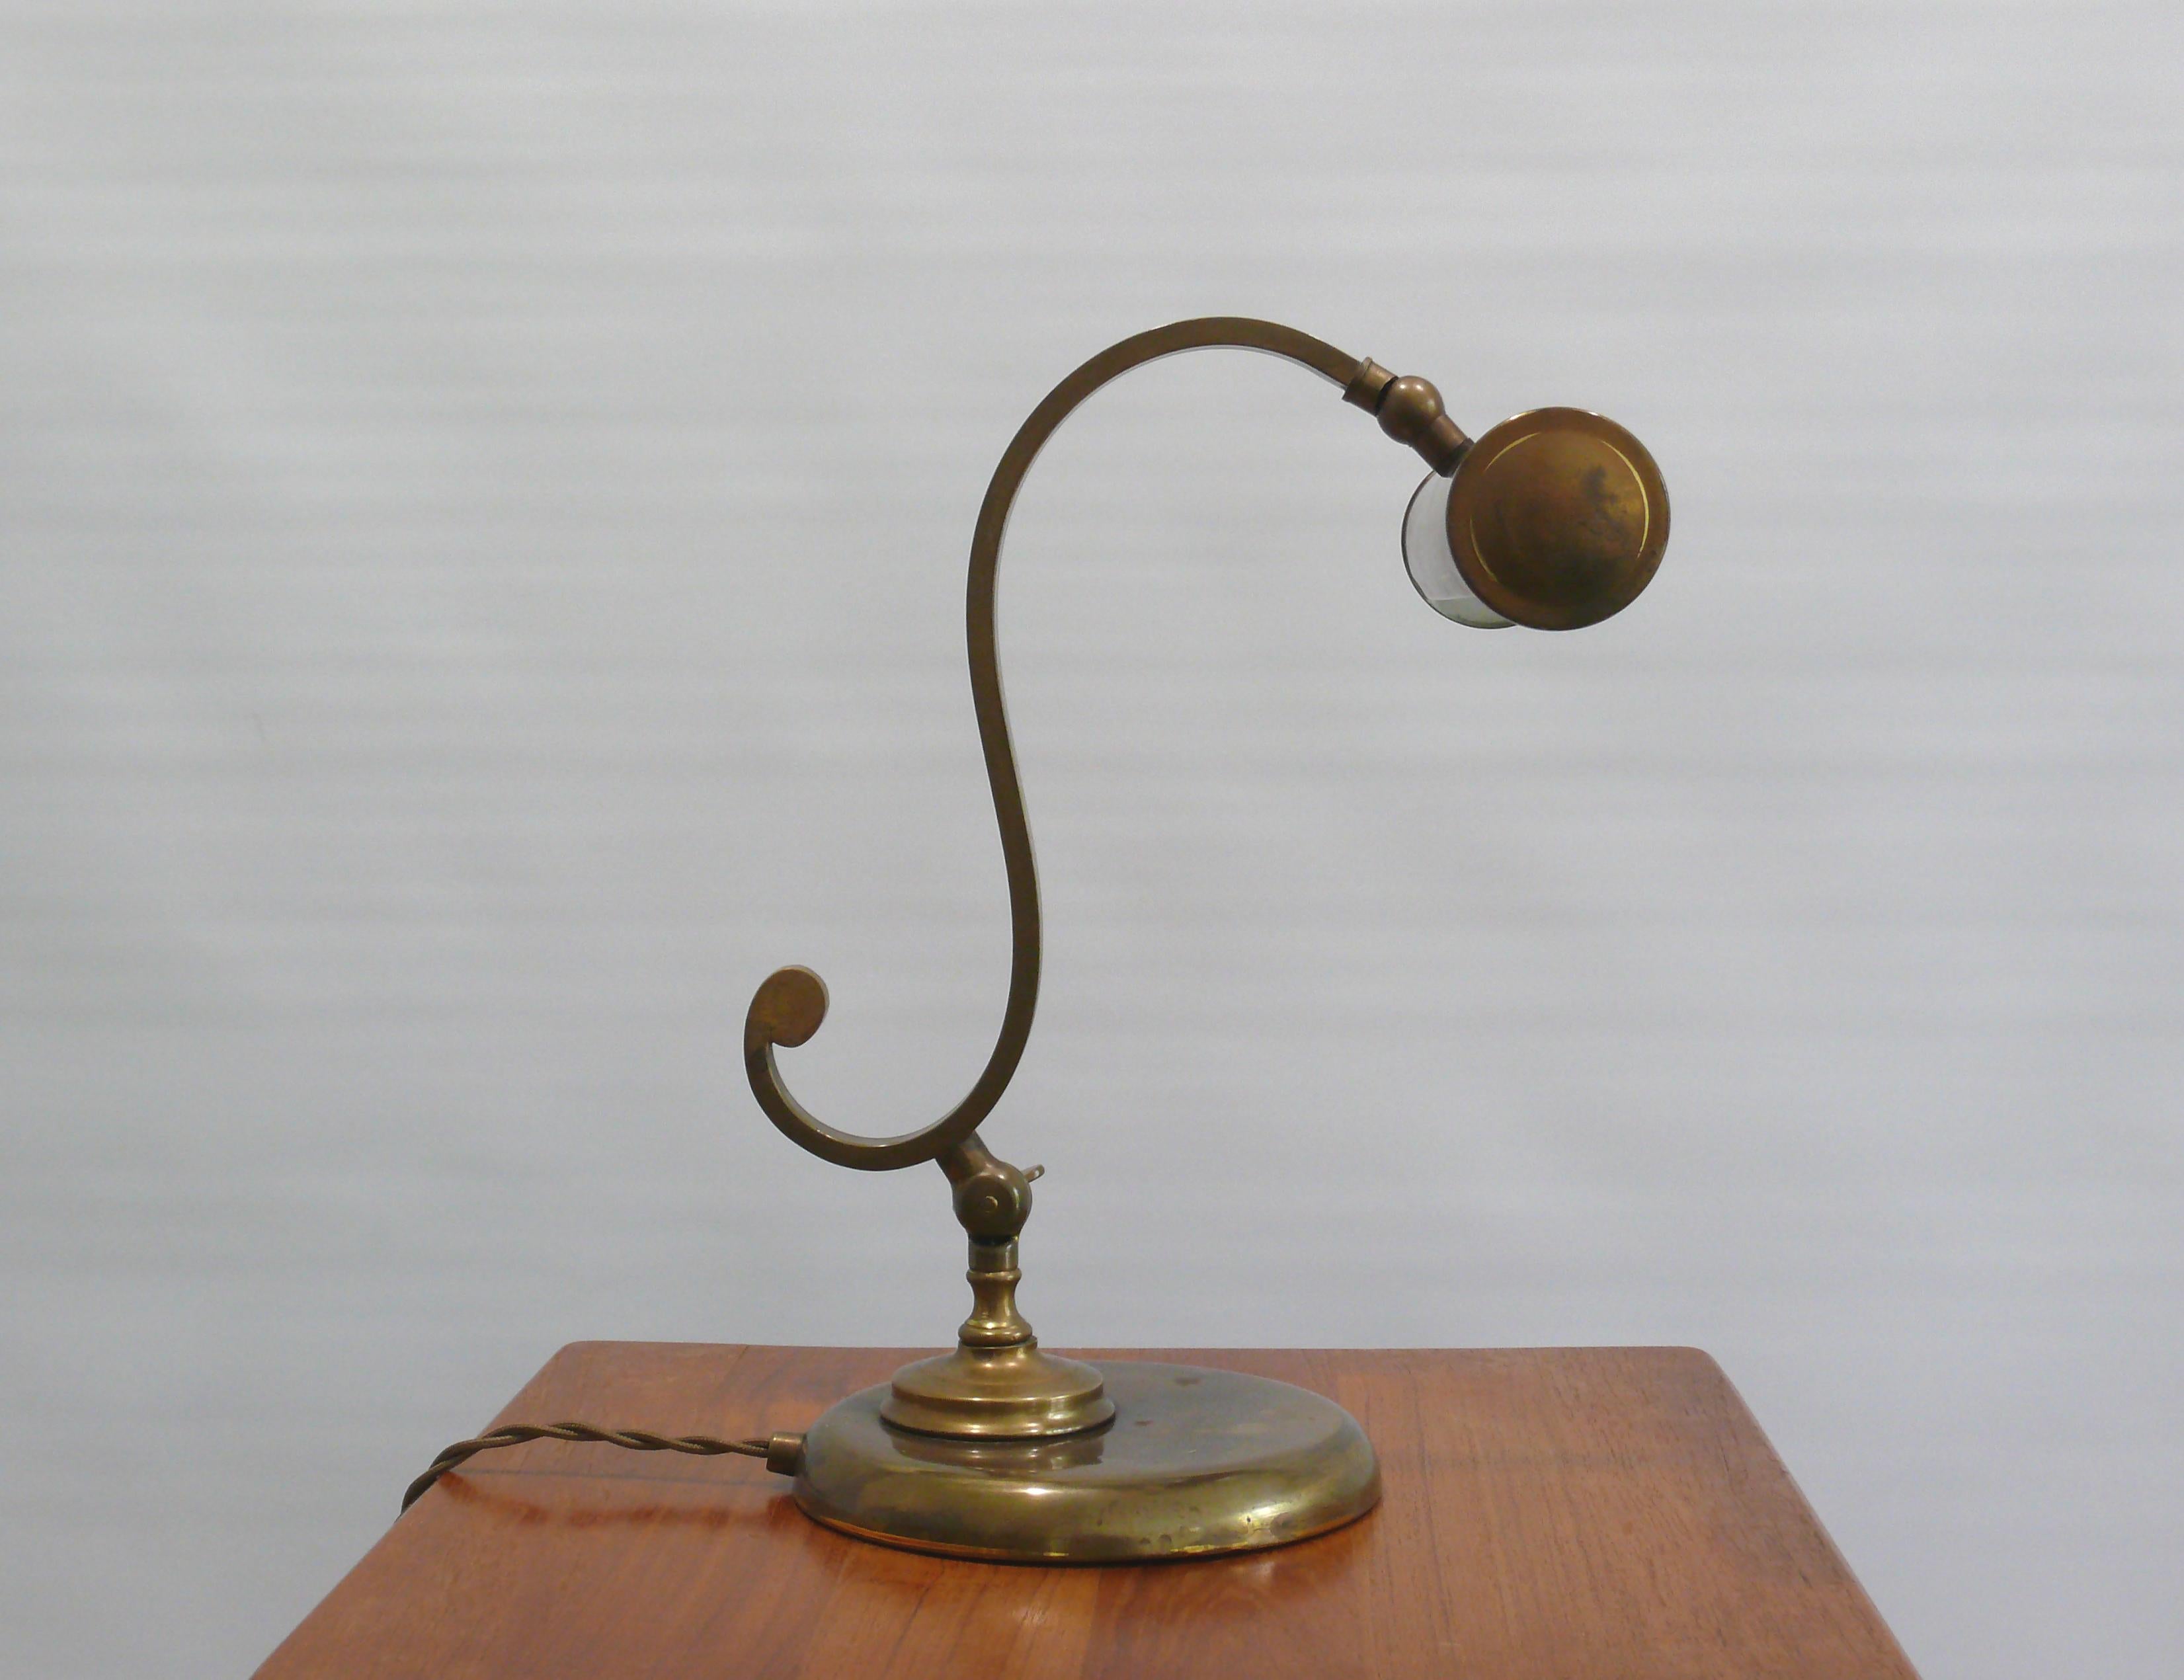 Very solid, heavy table lamp / piano lamp made of brass, probably from the 1950s in an Art Nouveau style. The lamp is made of brass with a heavy metal base. The umbrella and the arm can be adjusted. The light is switched on and off using a slide